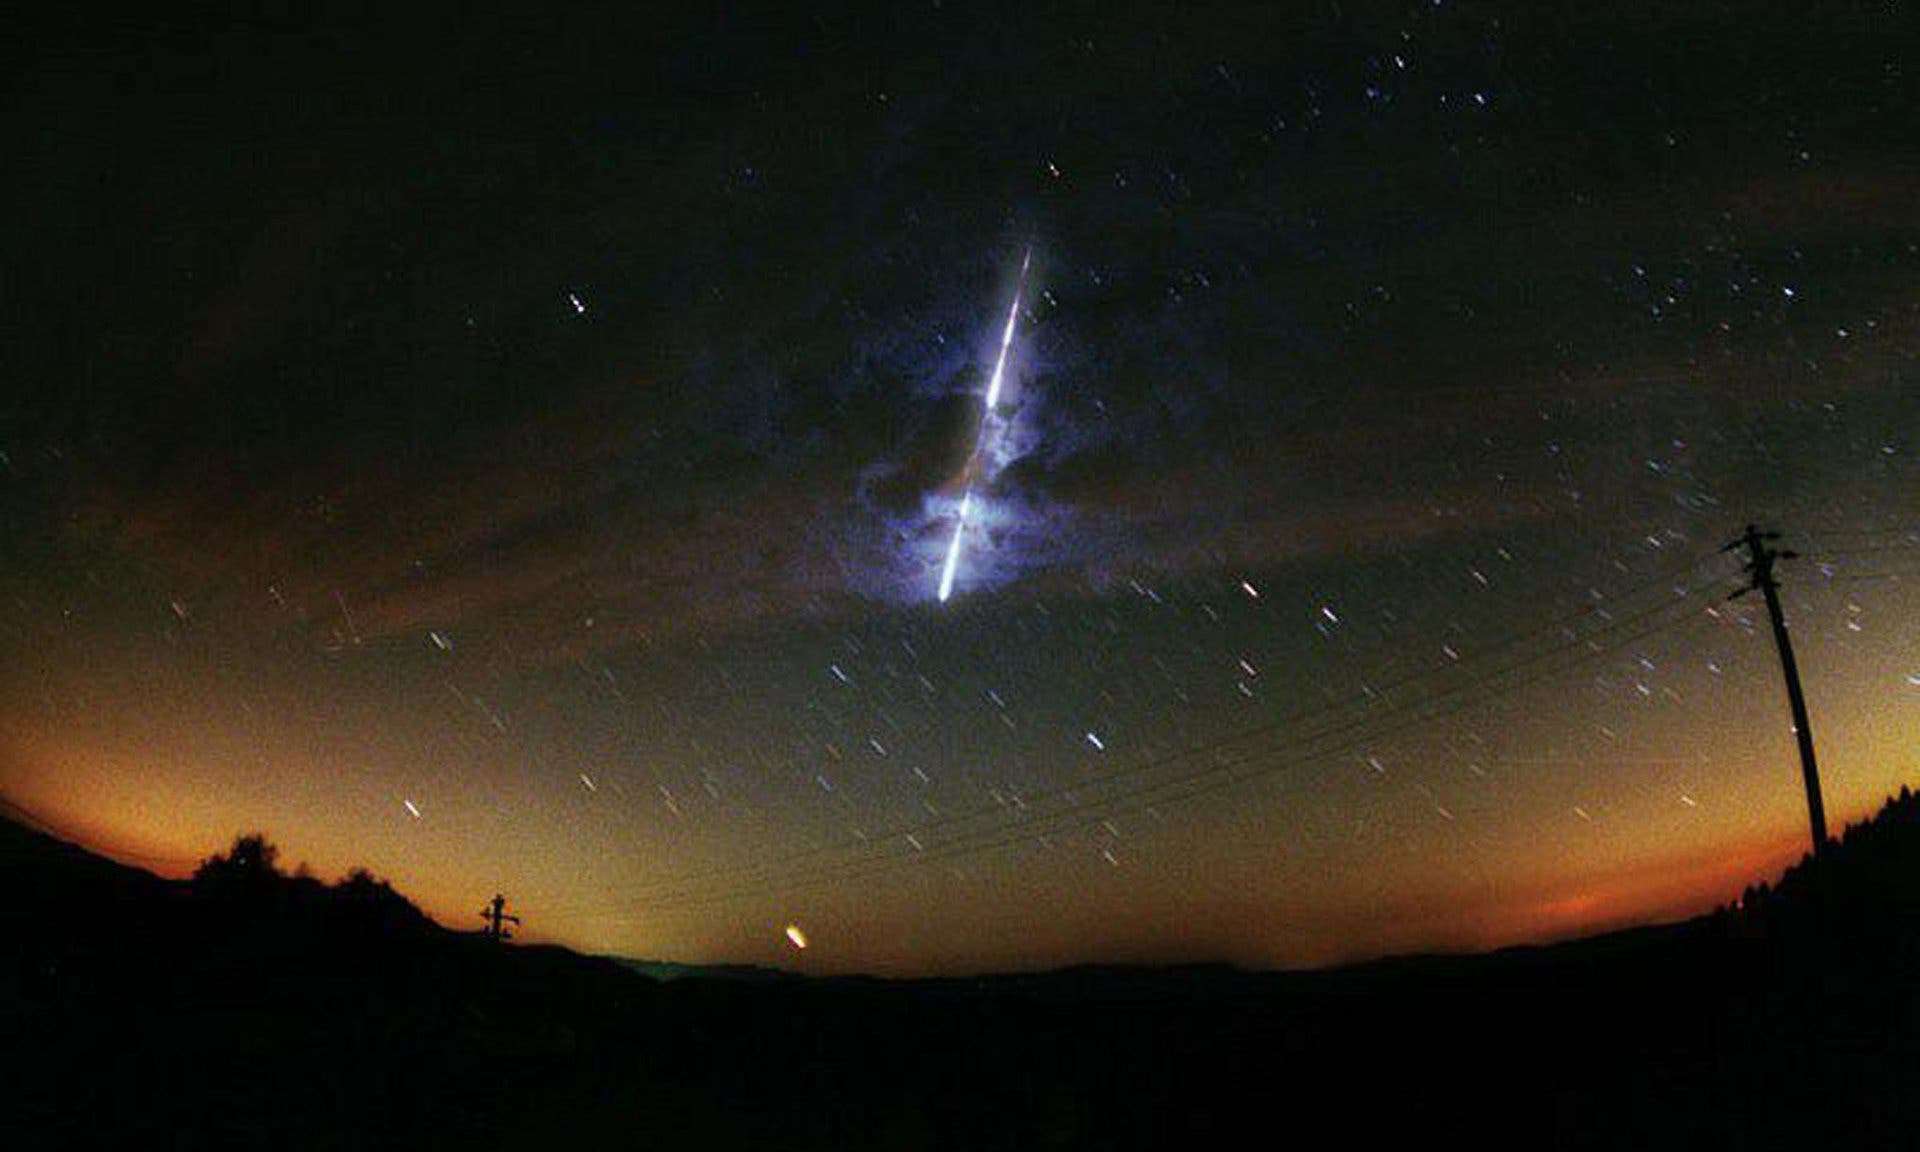 A Nasa image showing a meteor streaking across the sky in the United States.
Image credits NASA / EPA.